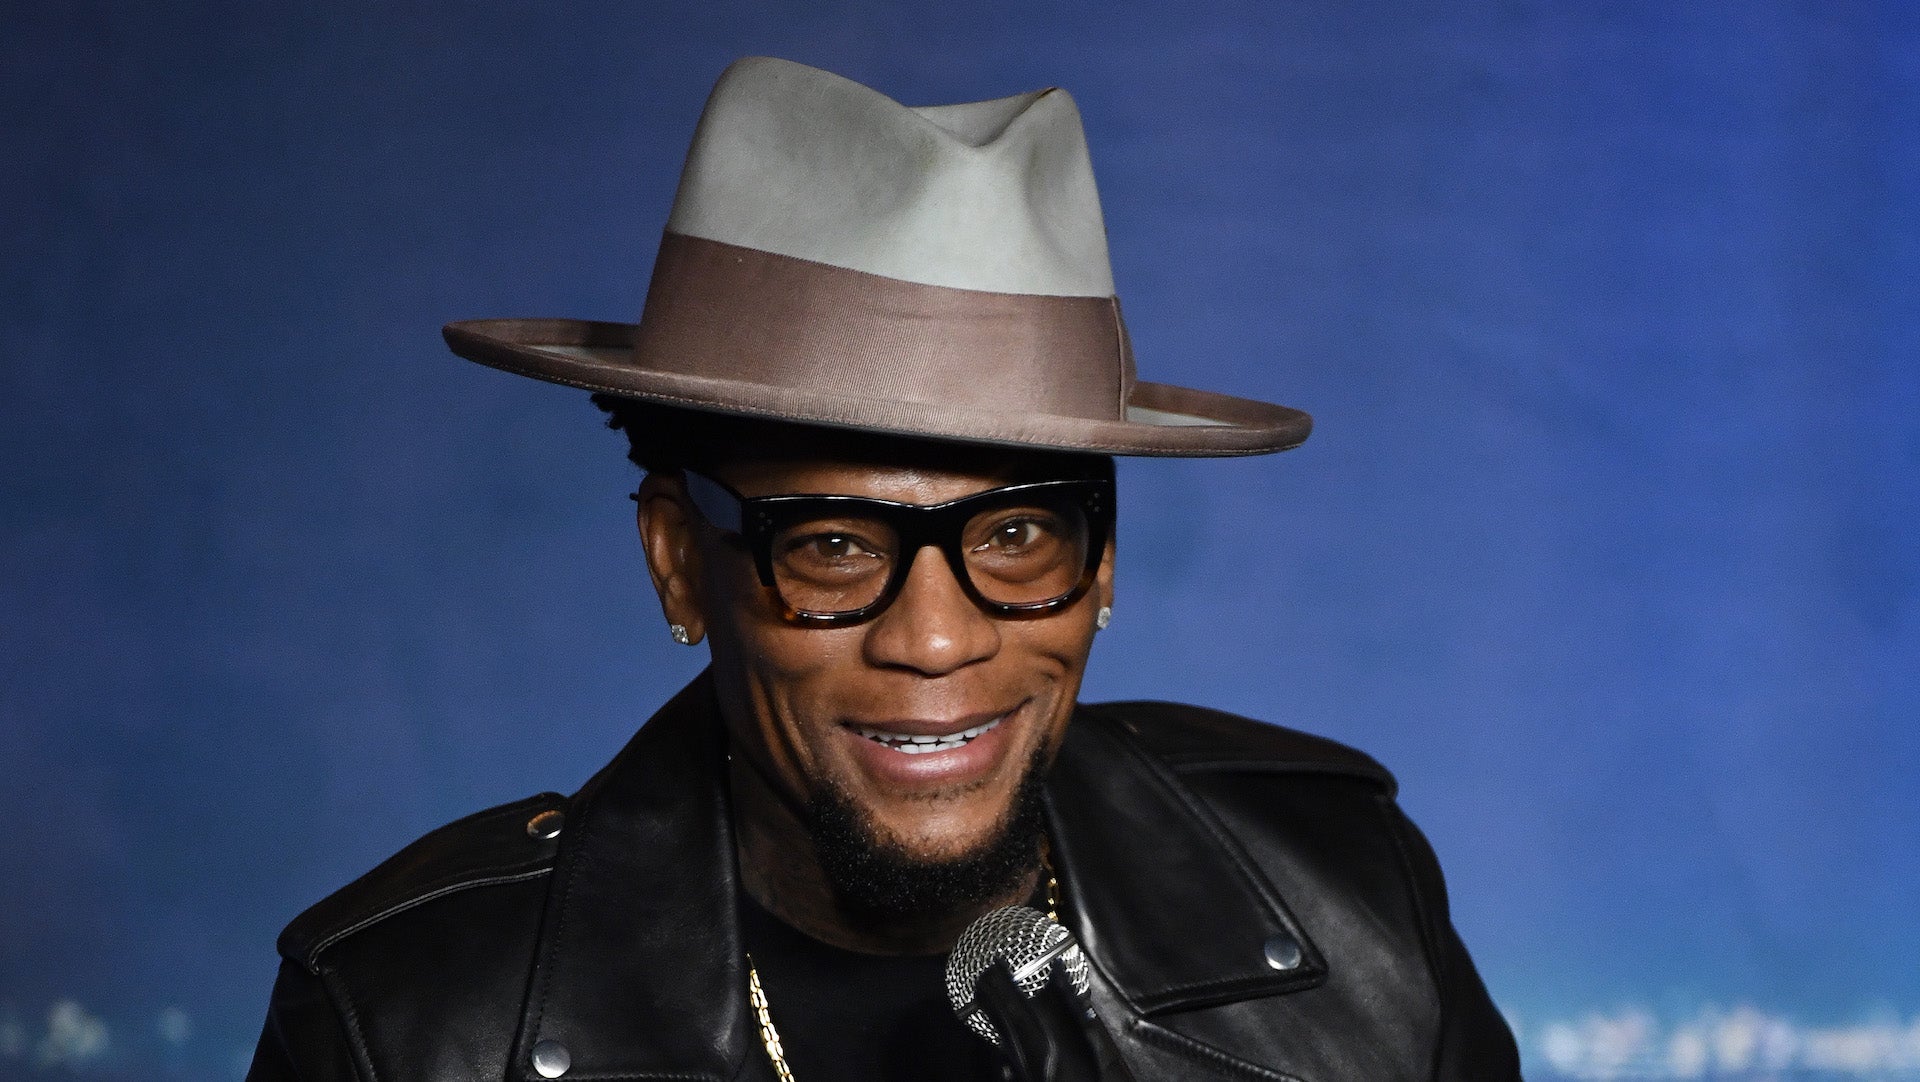 DL Hughley Tests Positive For COVID-19 After Passing Out On Stage